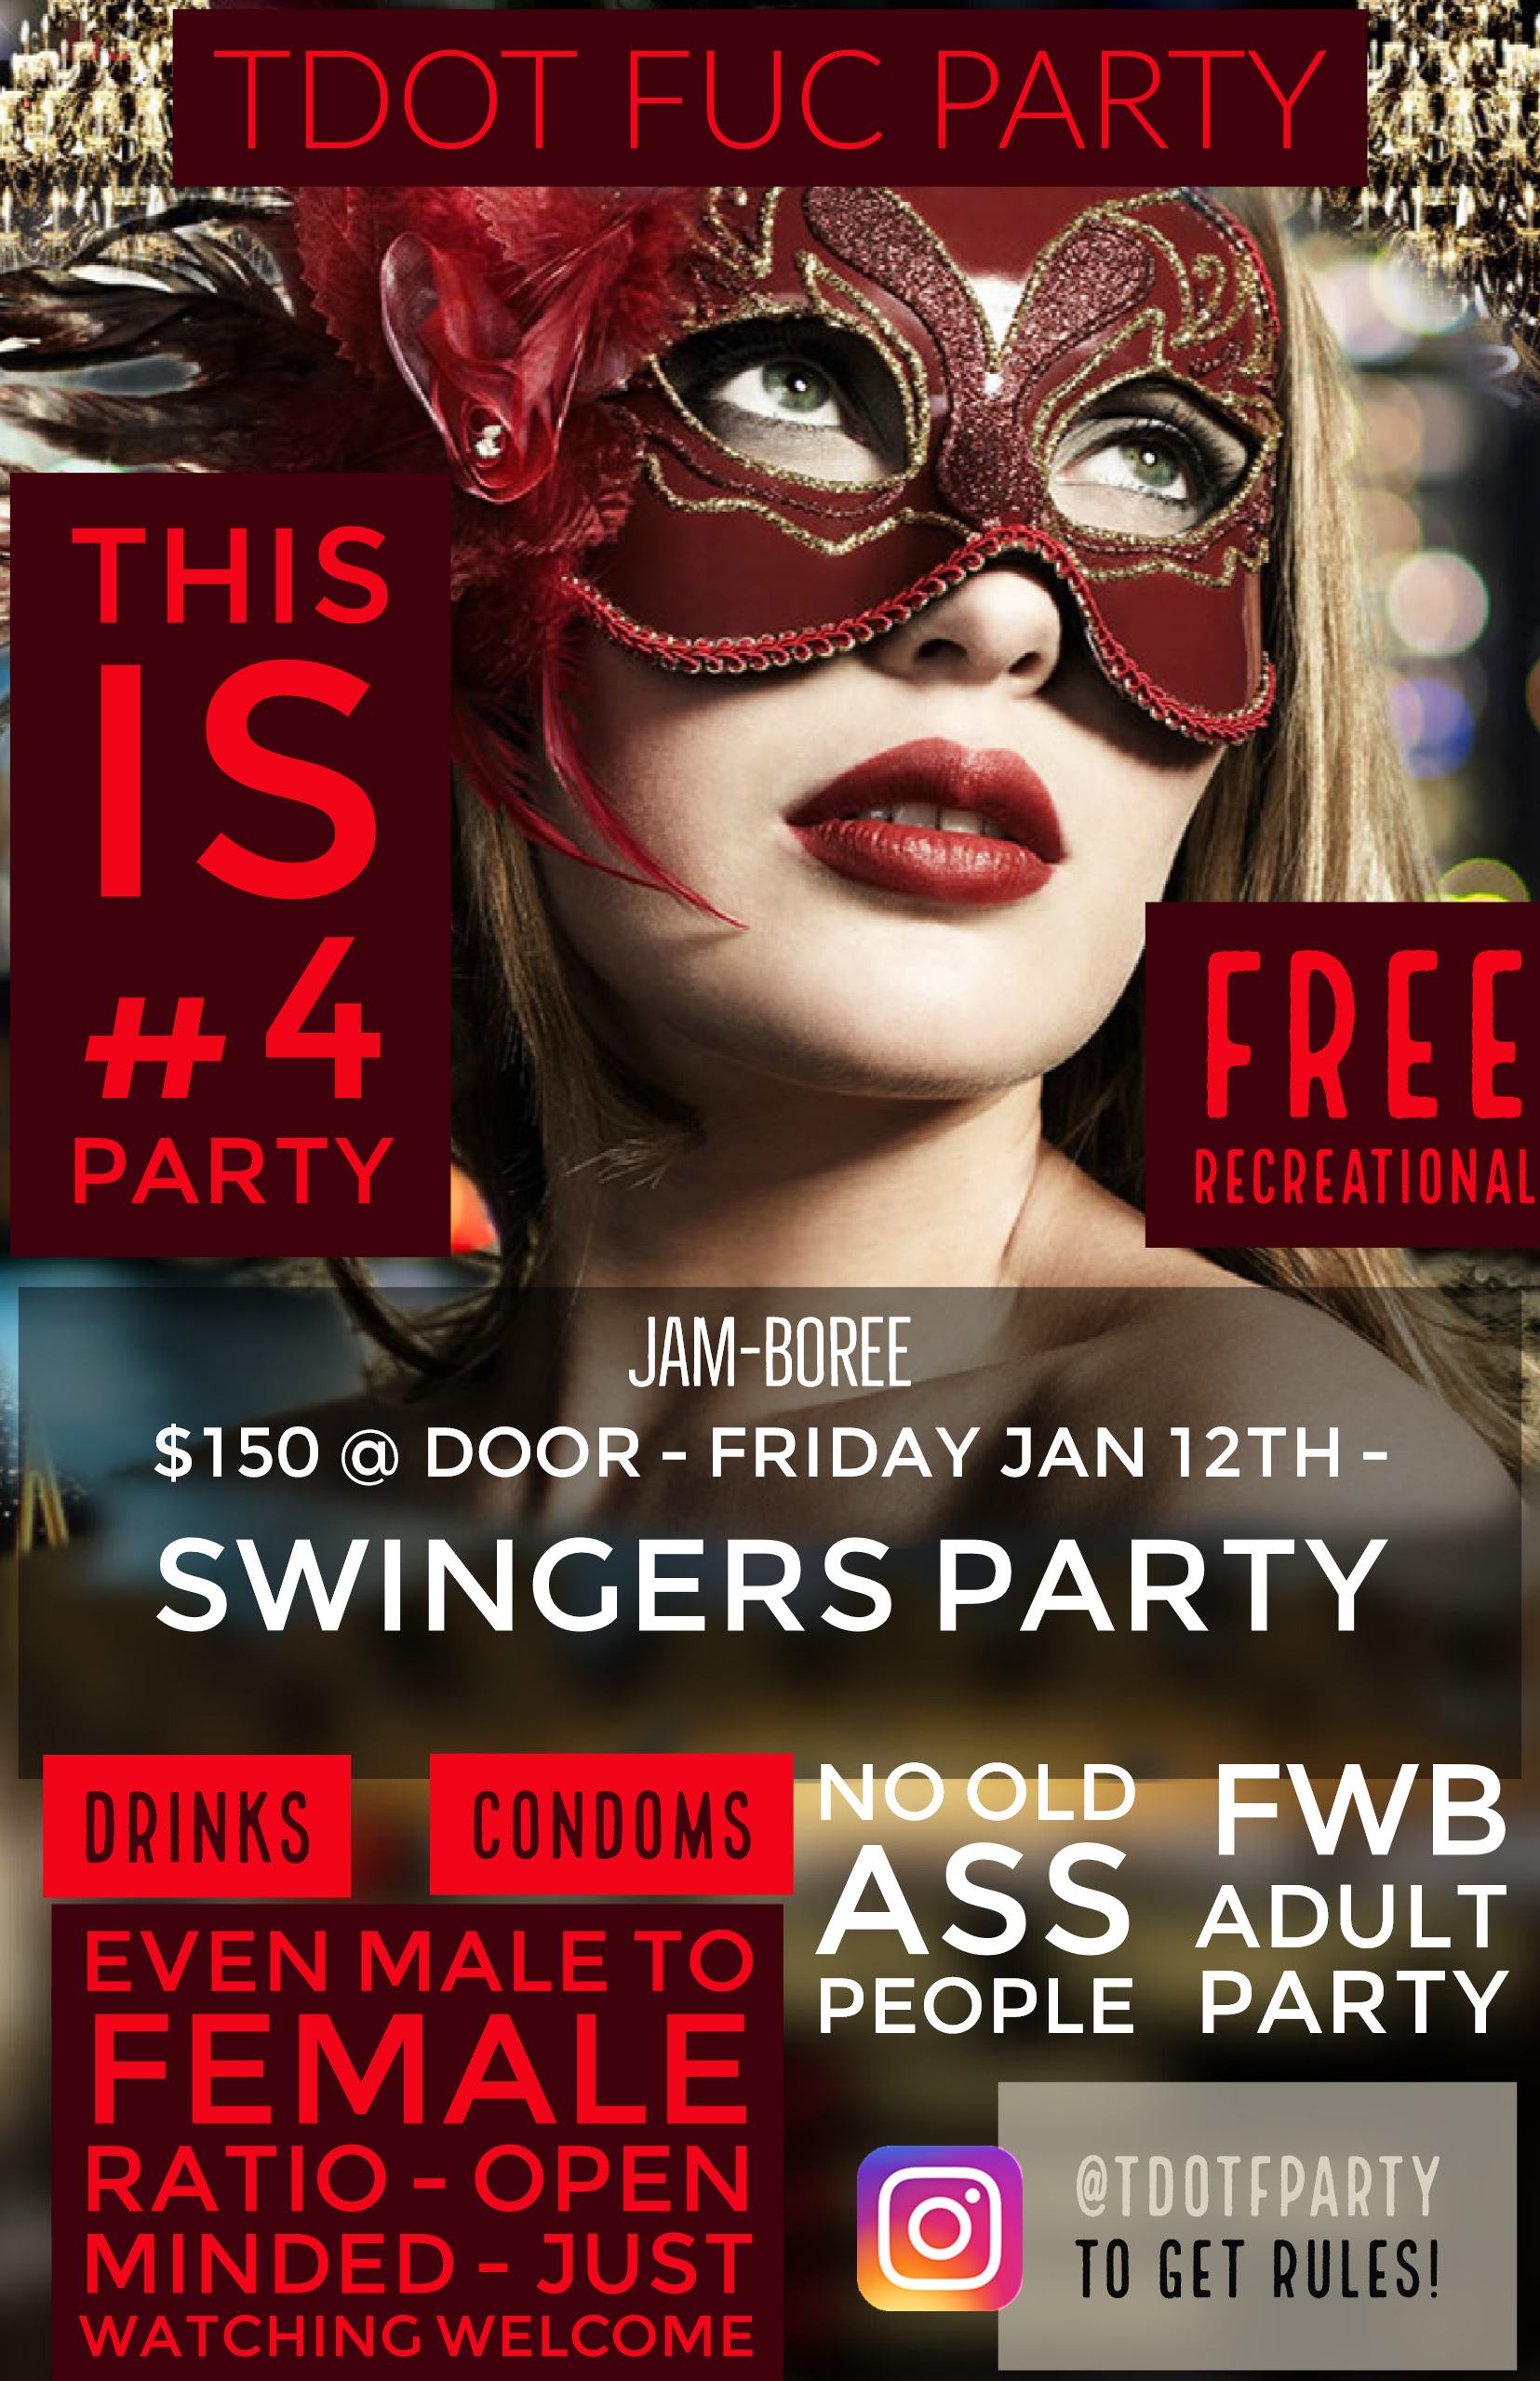 Tdotfparty Presents This Is 4 Swingers Party Theme 647 794 4272